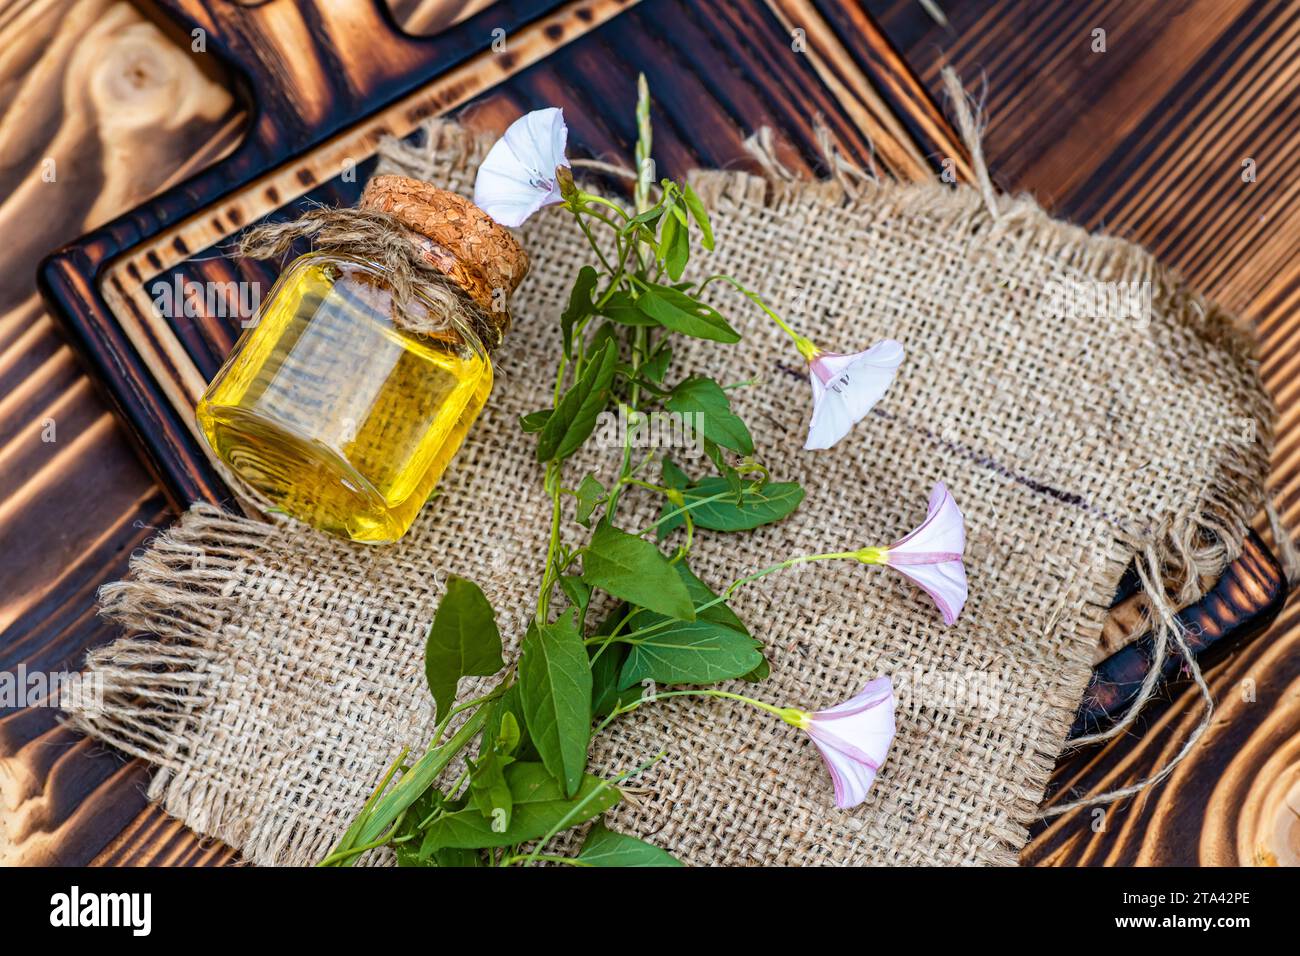 Convolvulus arvensis, or field bindweed making an elixir or tincture with essential oil from flowers. Top view. Fresh plants on a wooden cutting board Stock Photo